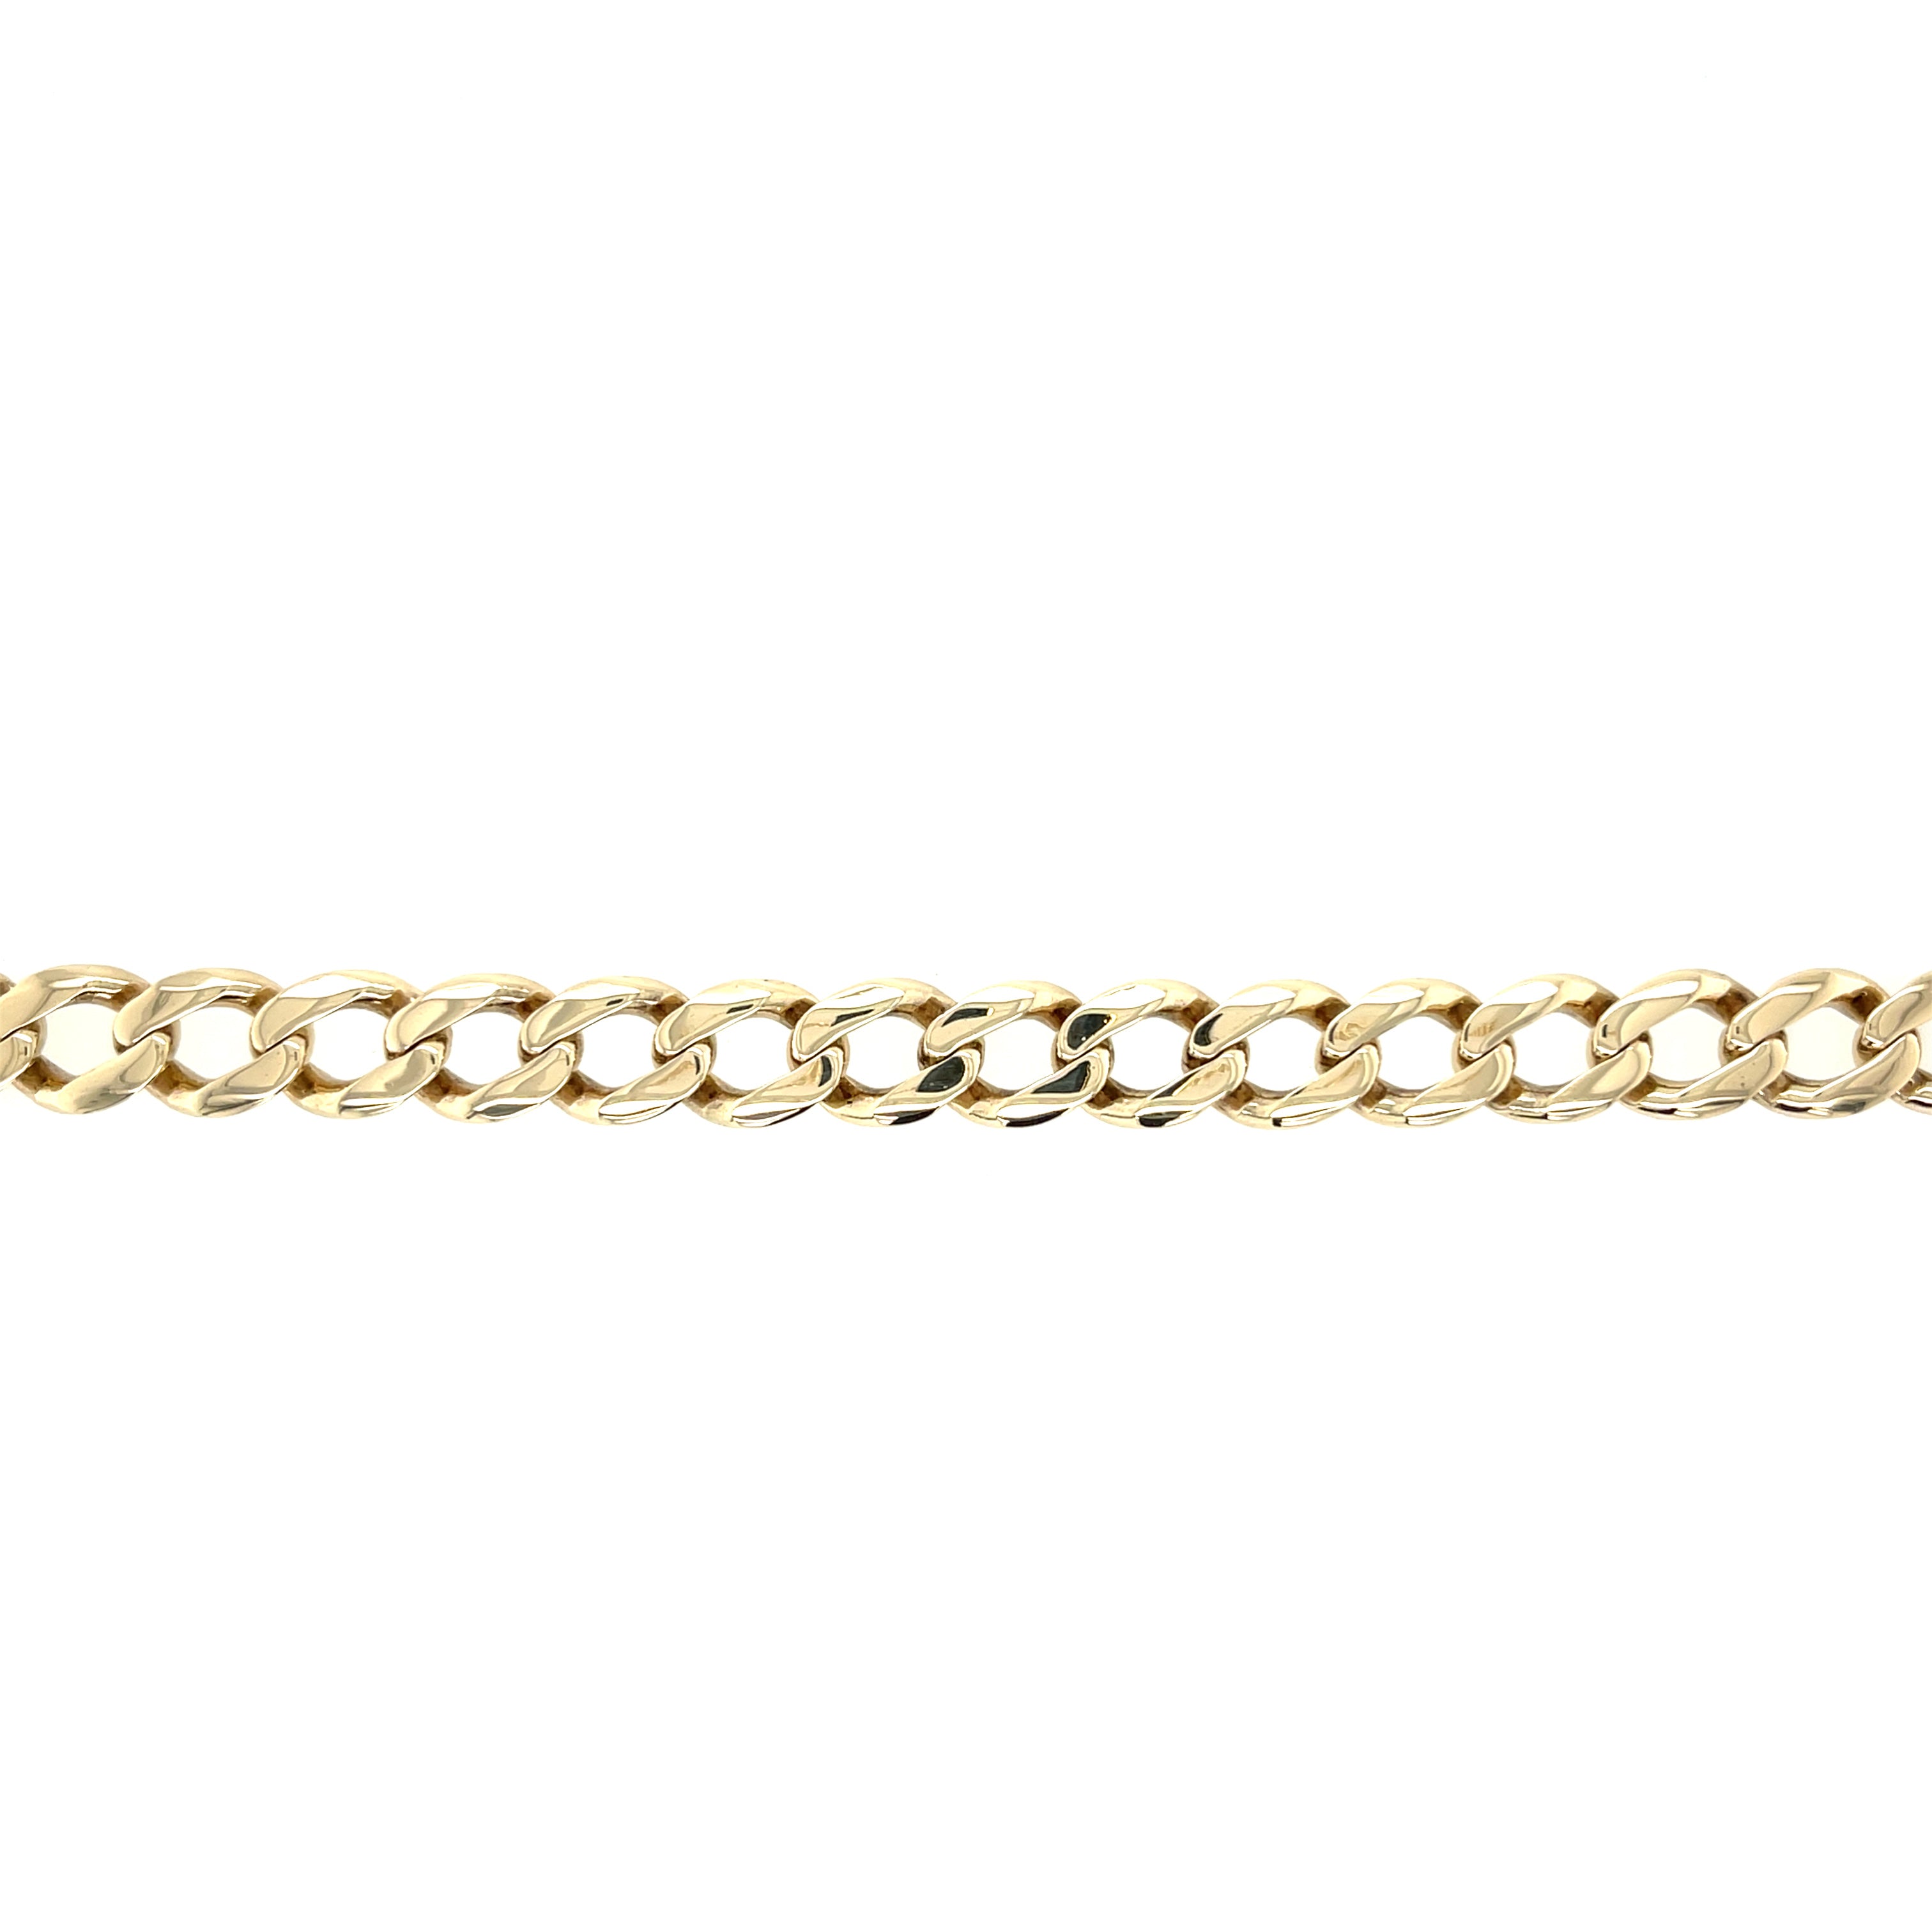 9ct Yellow Gold 9 Inch Curb Link Bracelet - 23.63g